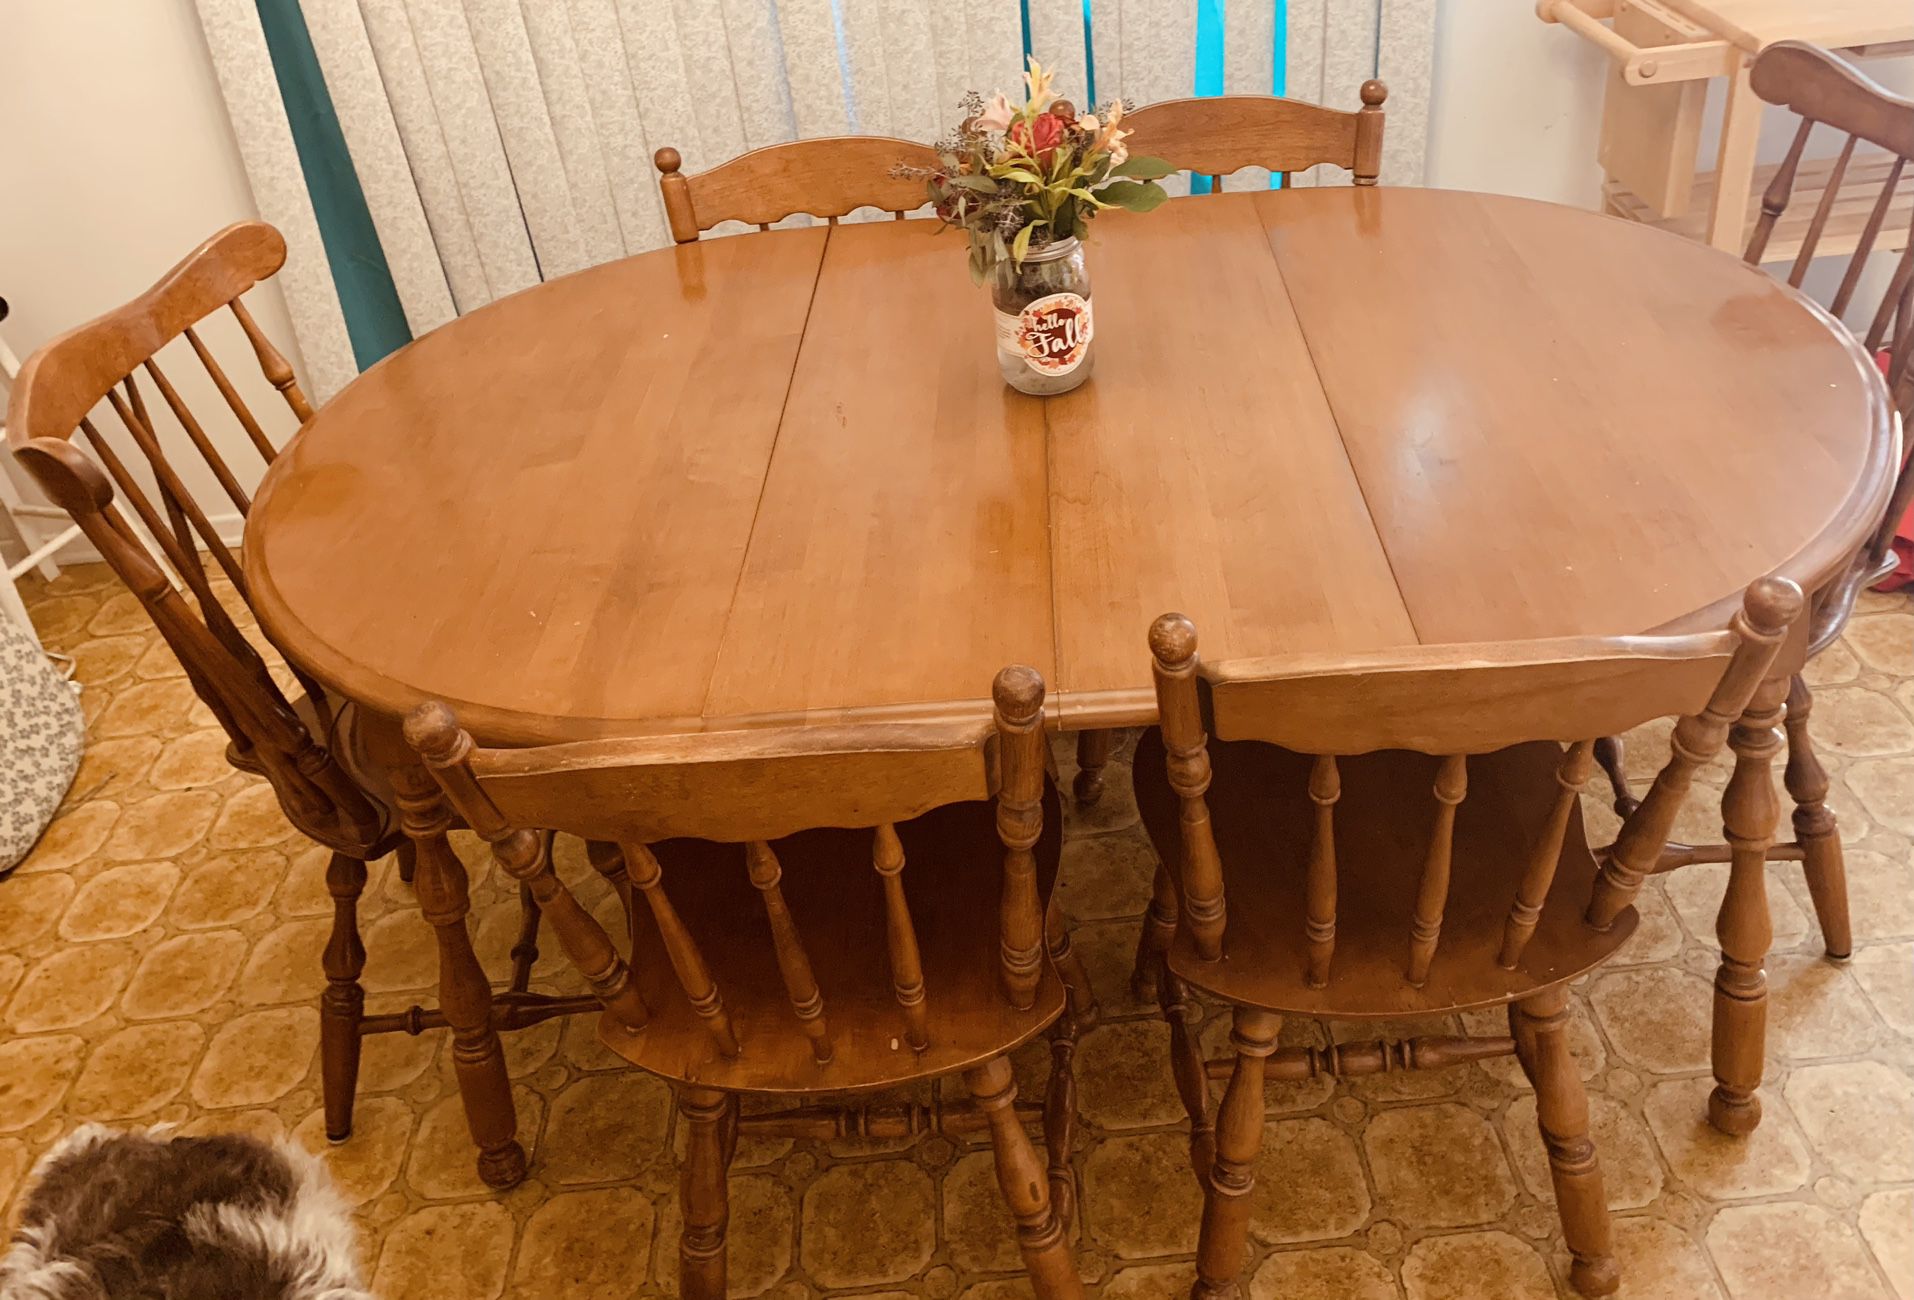 Wooden vintage table & 6 chairs, $100 obo must pick up by 9/23 in 90712. Cash/venmo/Zelle/Apple Pay only.  